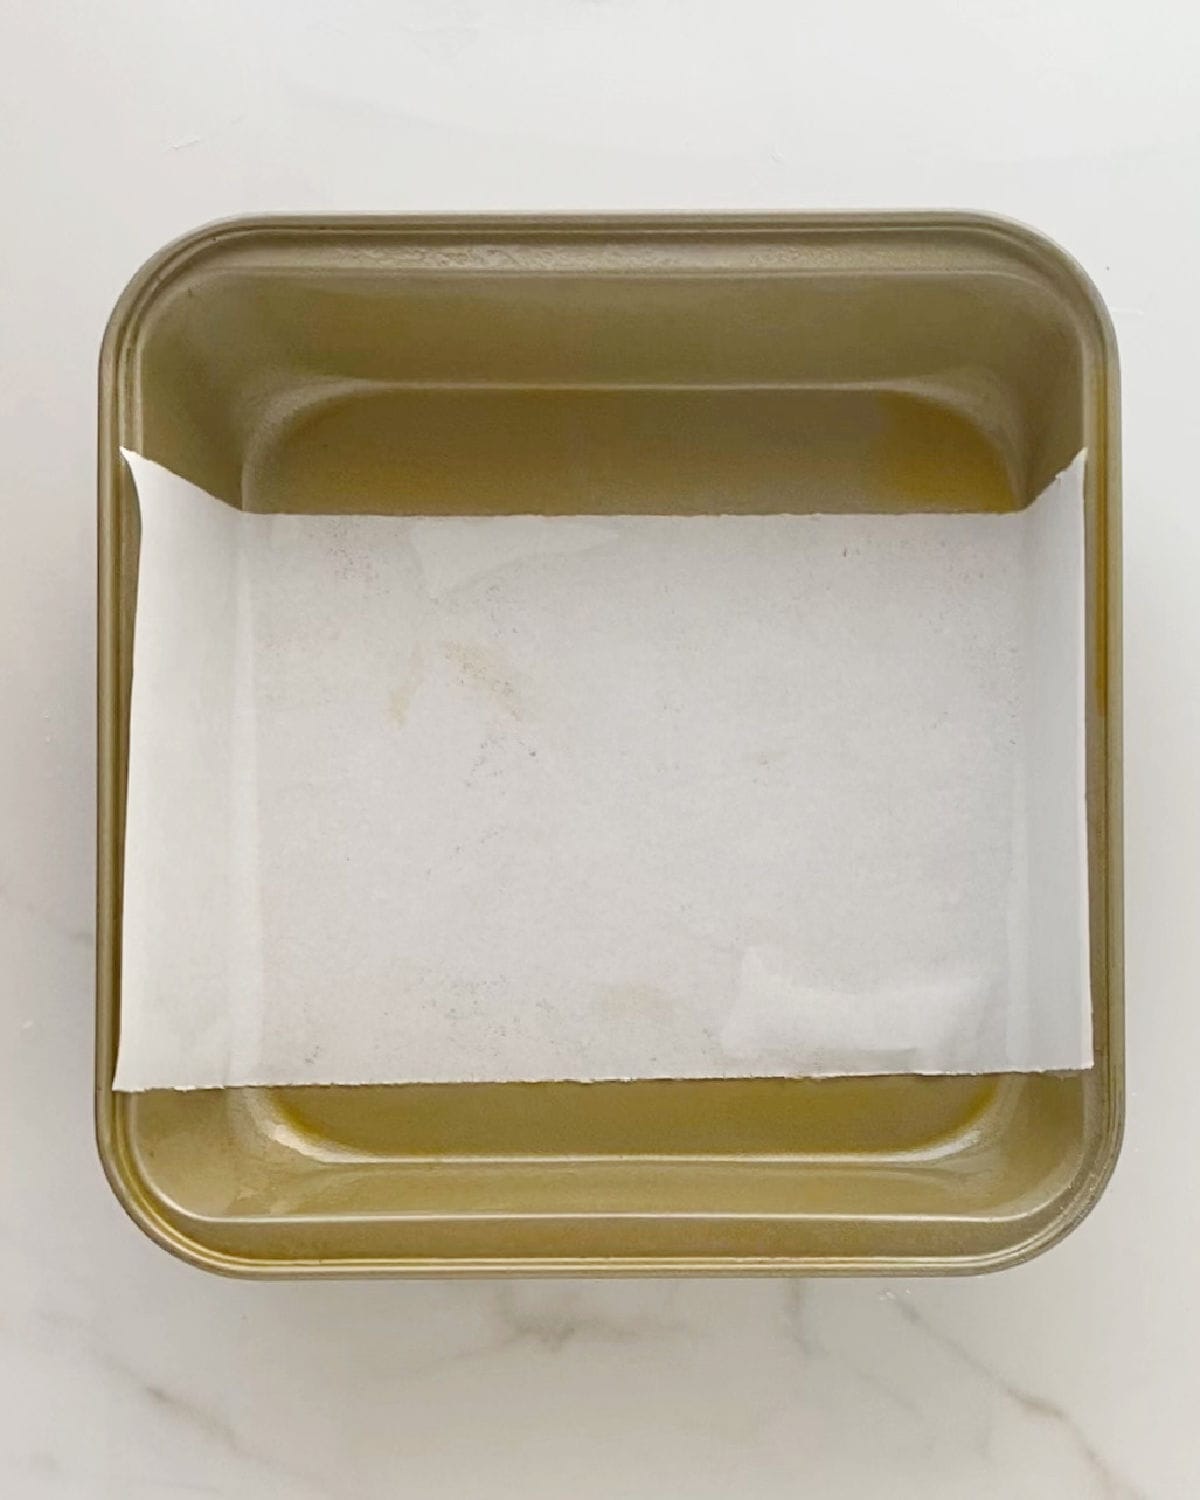 Square metal pan lined with strip of parchment paper. White surface.